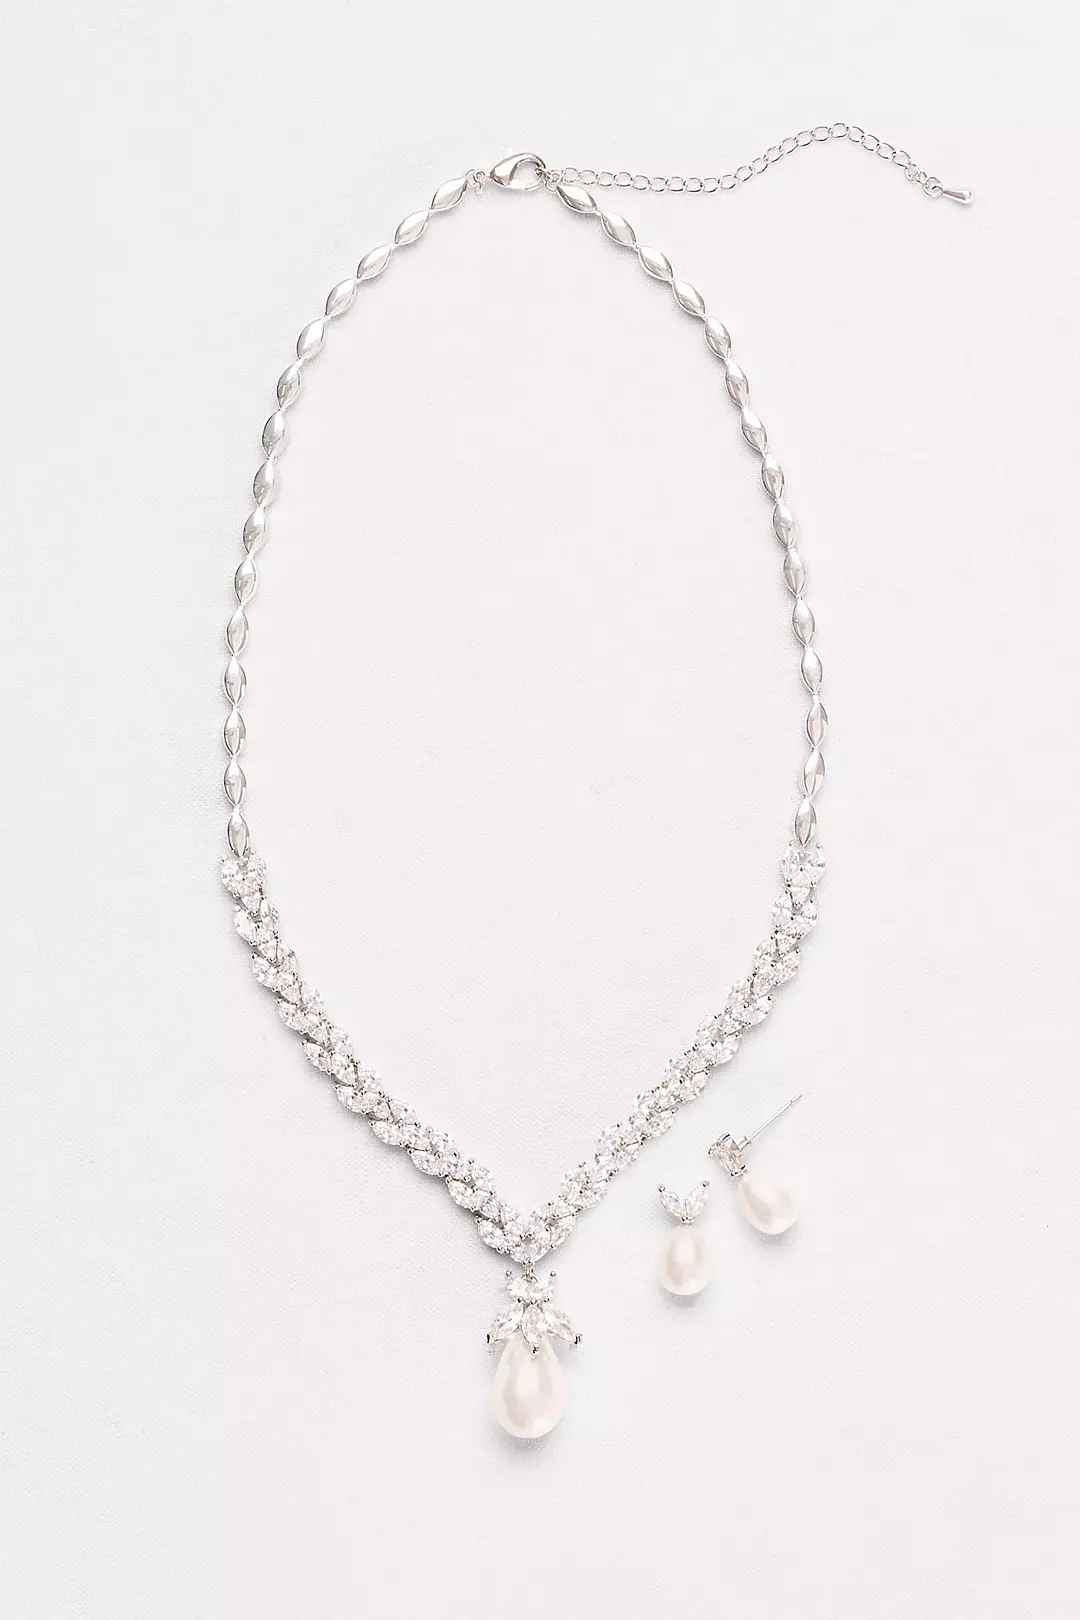 Pearl and Cubic Zirconia Necklace and Earring Set Image